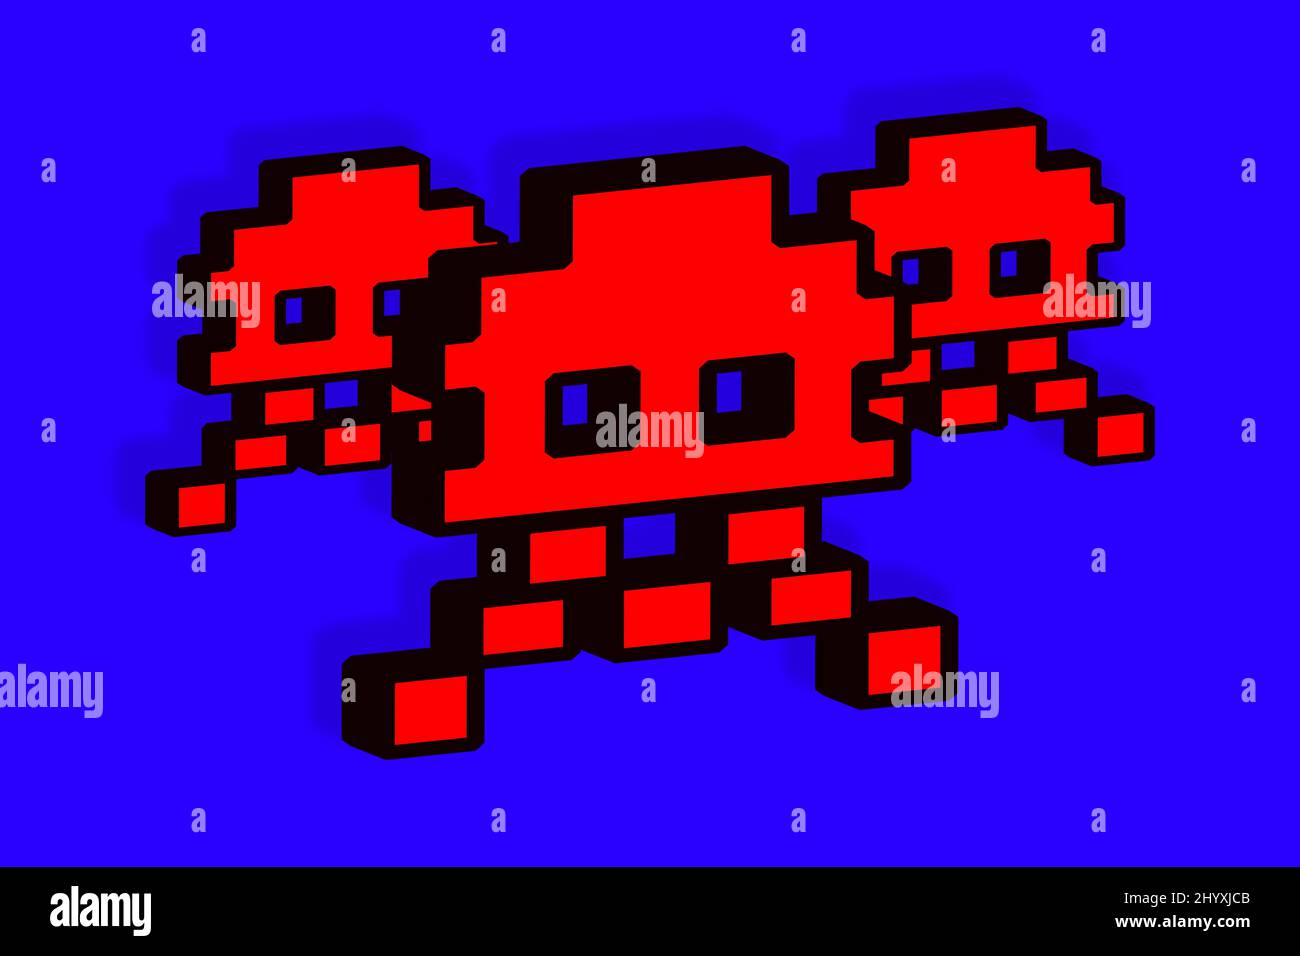 Nostalgic Vintage 80's Retro Pixel art, three giant red alien invaders from outer space in 8-bit 2D pixelated graphics style on a blue background Stock Photo